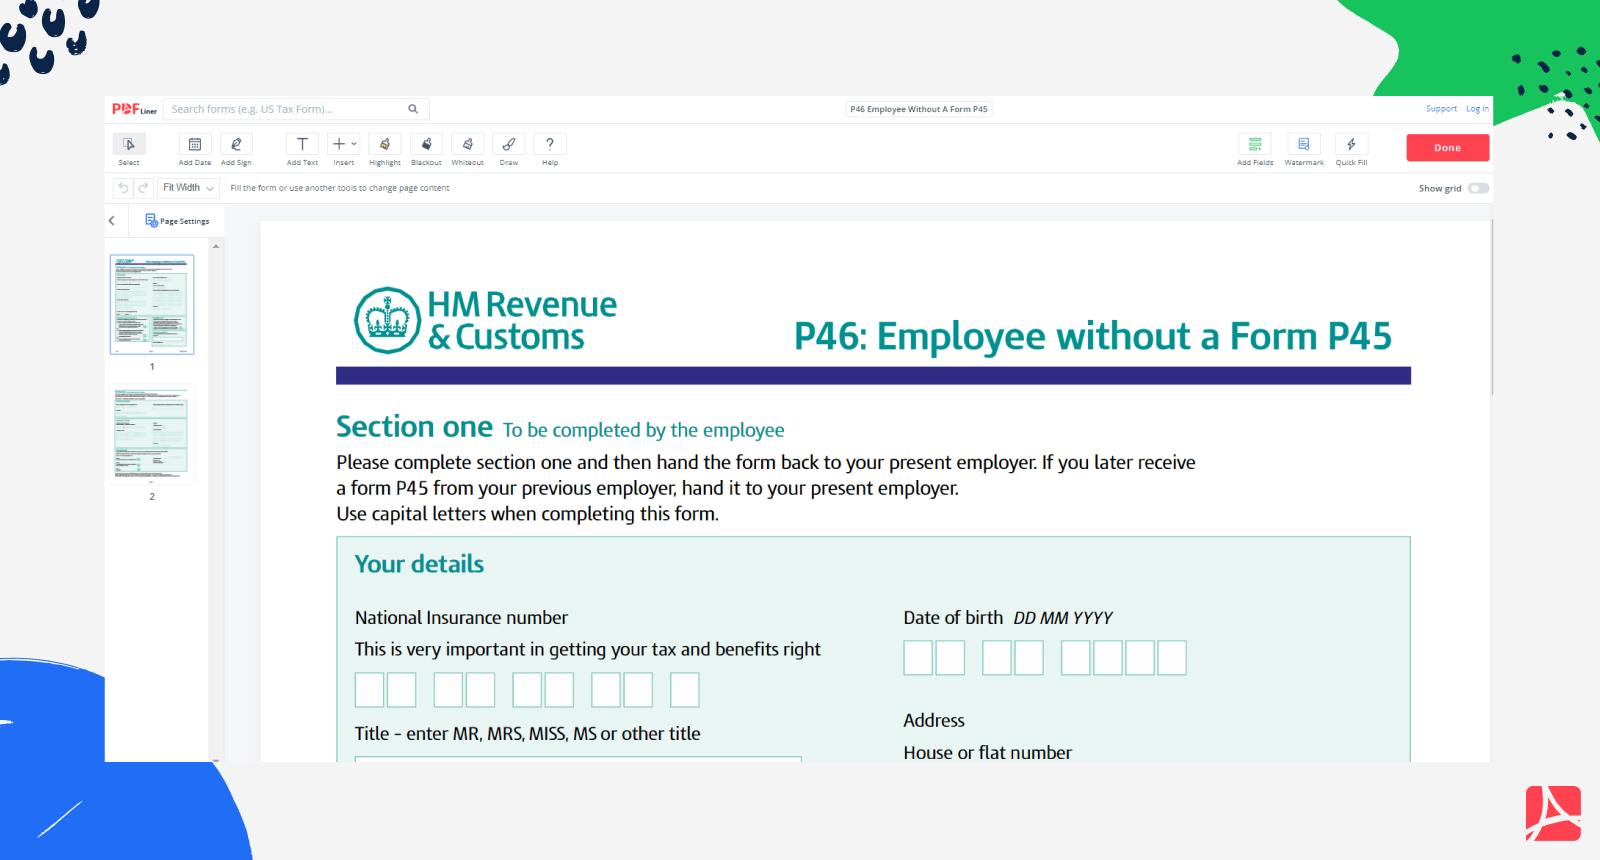 P46: Employee Without A Form P45 on PDFLiner